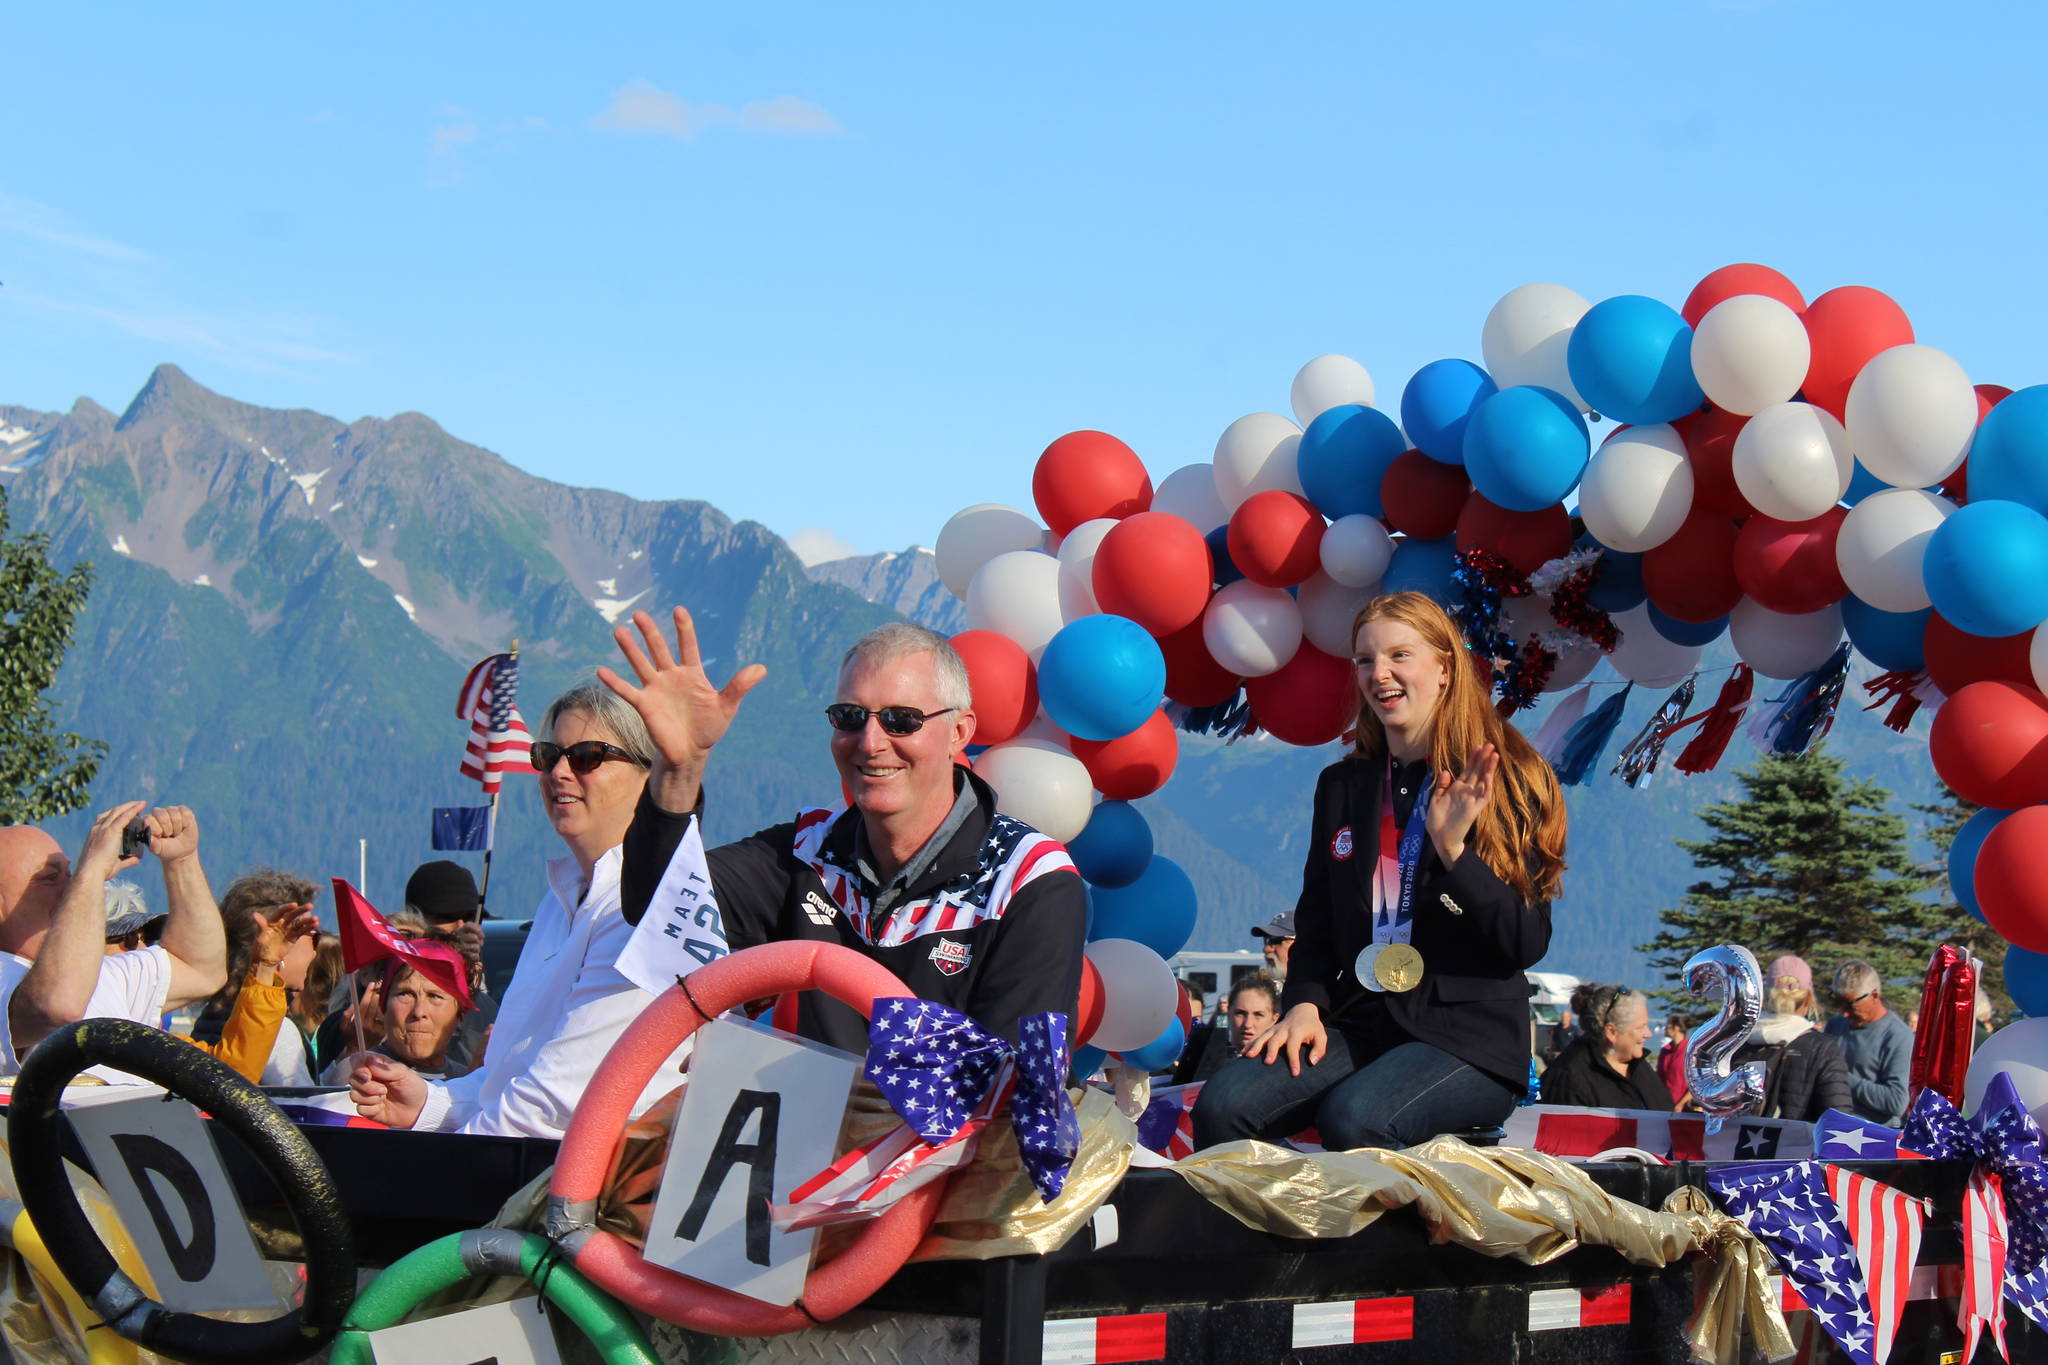 Olympic gold medalist Lydia Jacoby waves to the crowd in Seward during her celebratory parade on Thursday, August 5, 2021. (Ashlyn O'Hara/Peninsula Clarion)